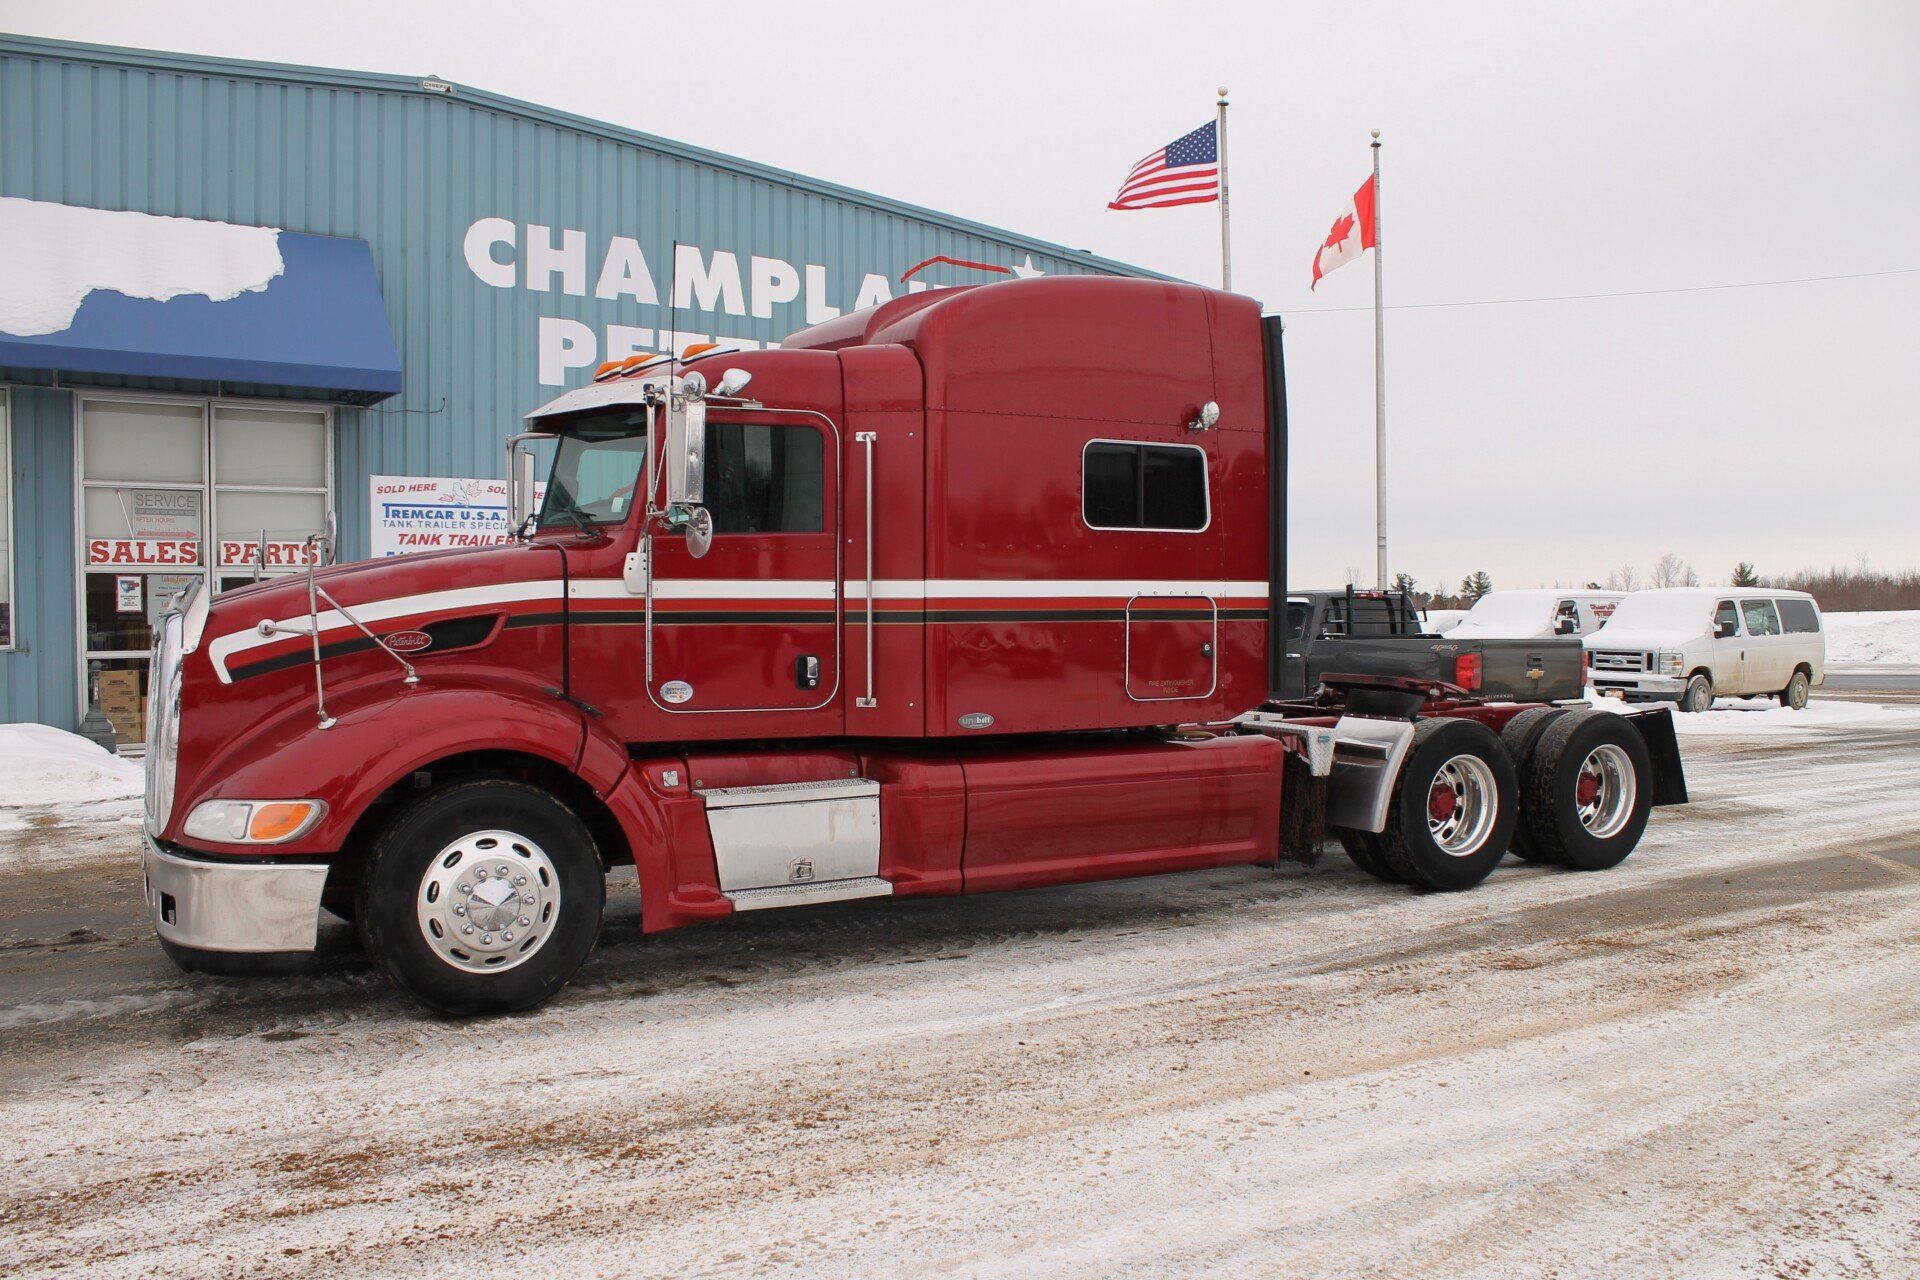 A red semi truck is parked in front of a building that says champlain